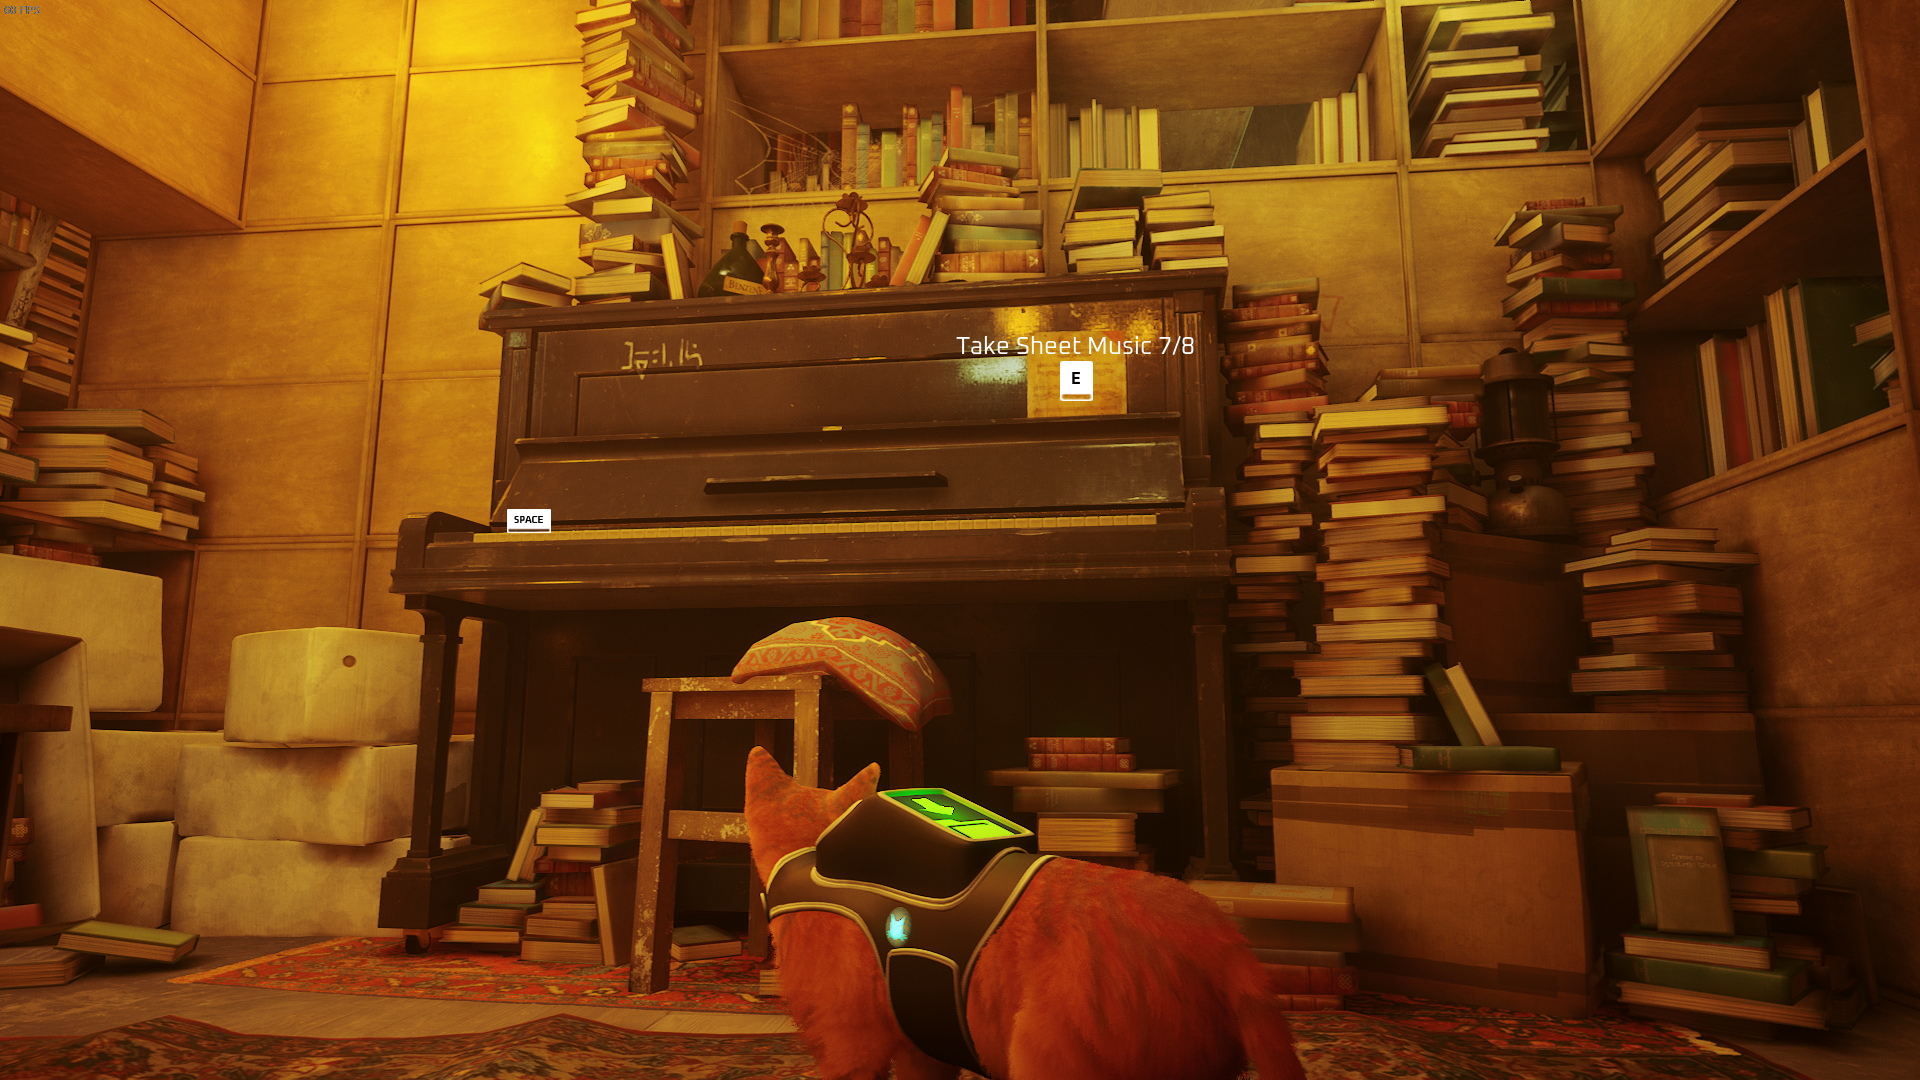 The Outsider looks at a piece of sheet music sat on the piano in the library in Stray.